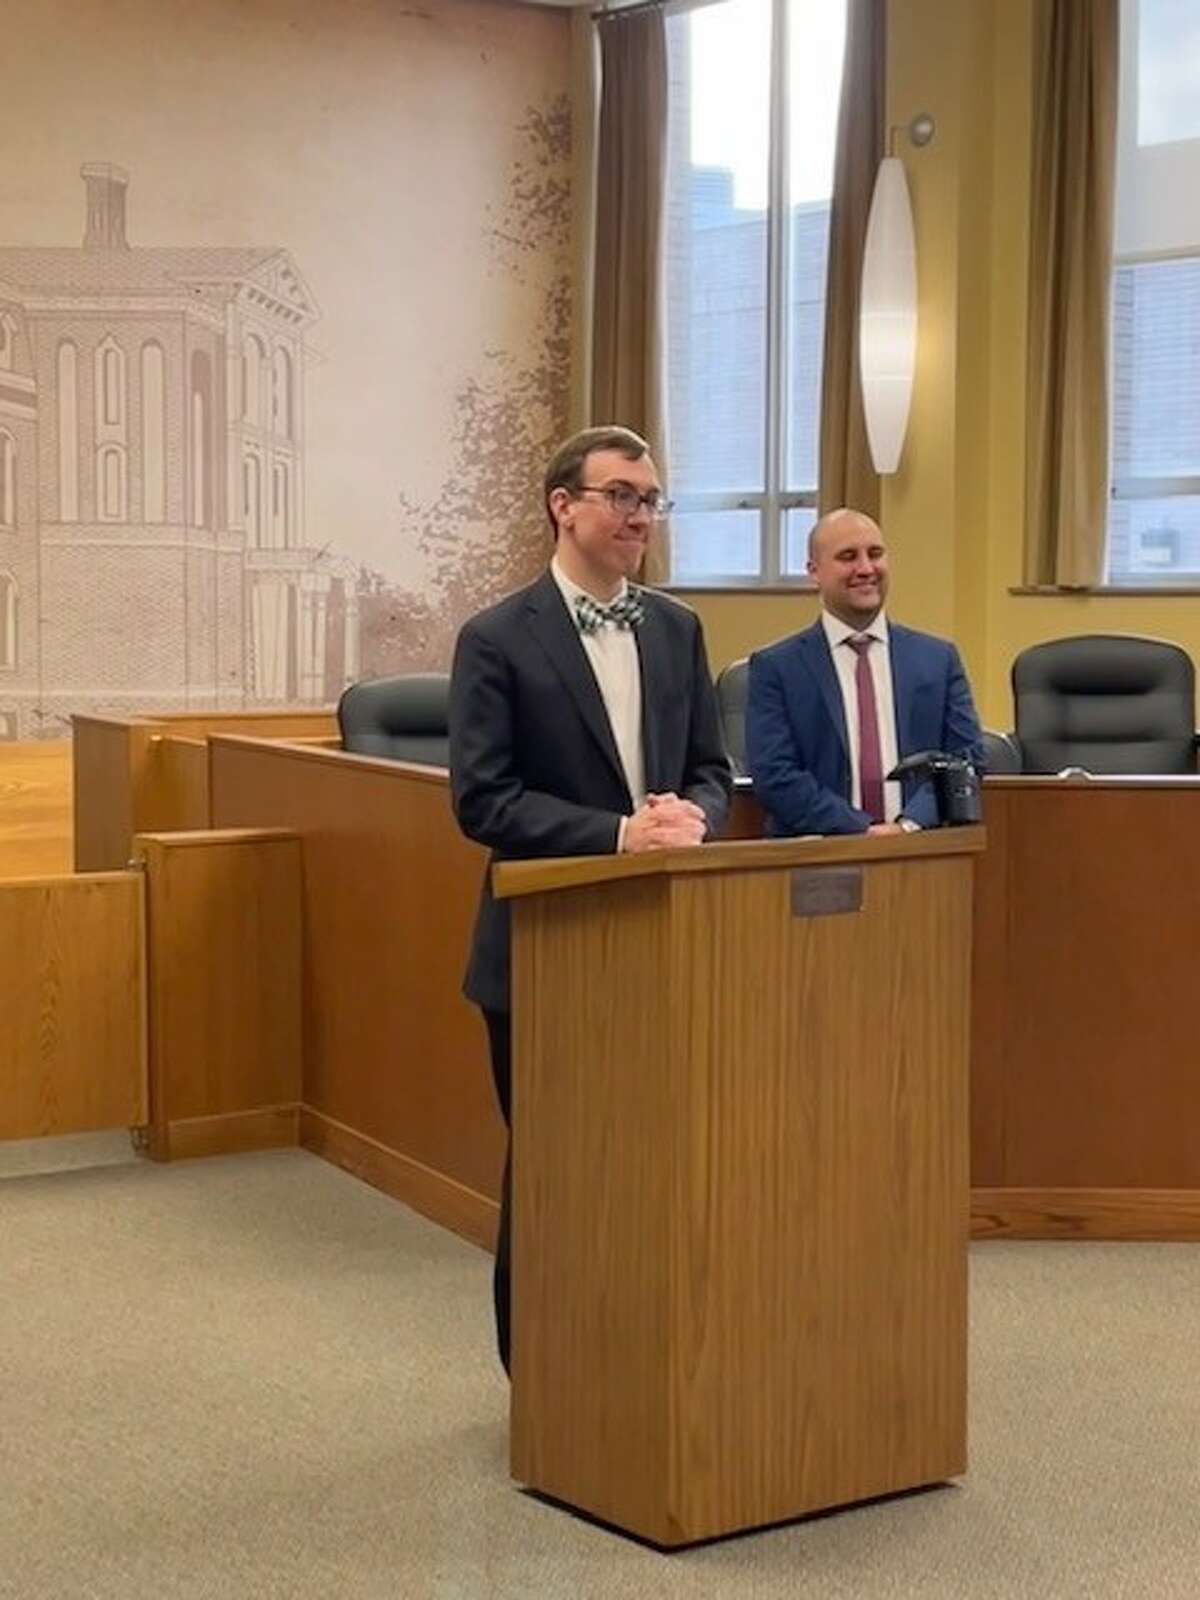 Earlier this month, Ryan Particka was formally sworn in at the Huron County District Court by Judge Prill into the Michigan bar. 